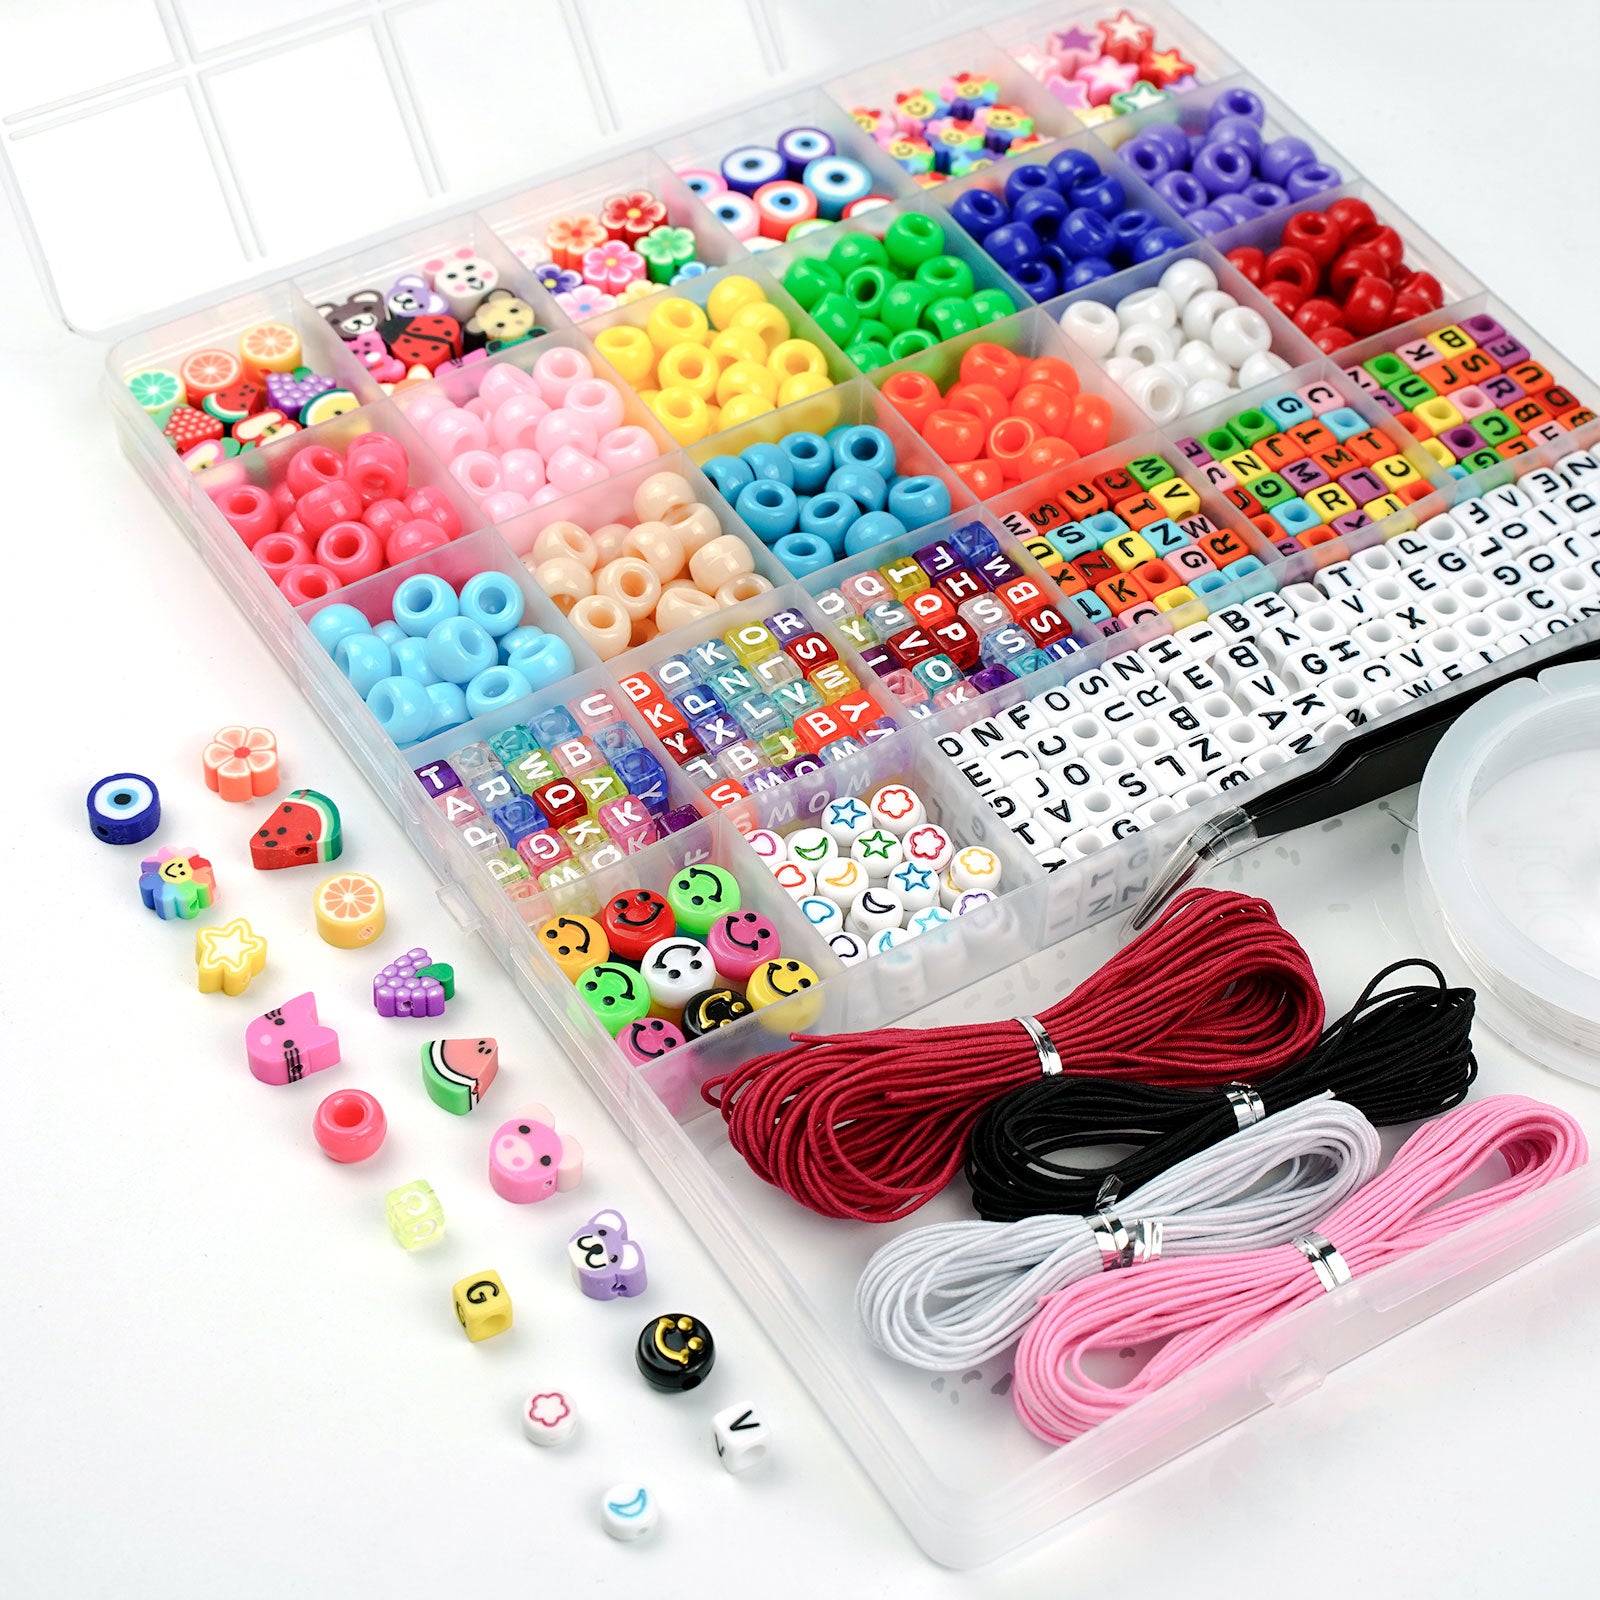 Clay Beads Bracelet Making Kit, Bead Jewelry Making Heishi Letter Bead  Crafts As | eBay